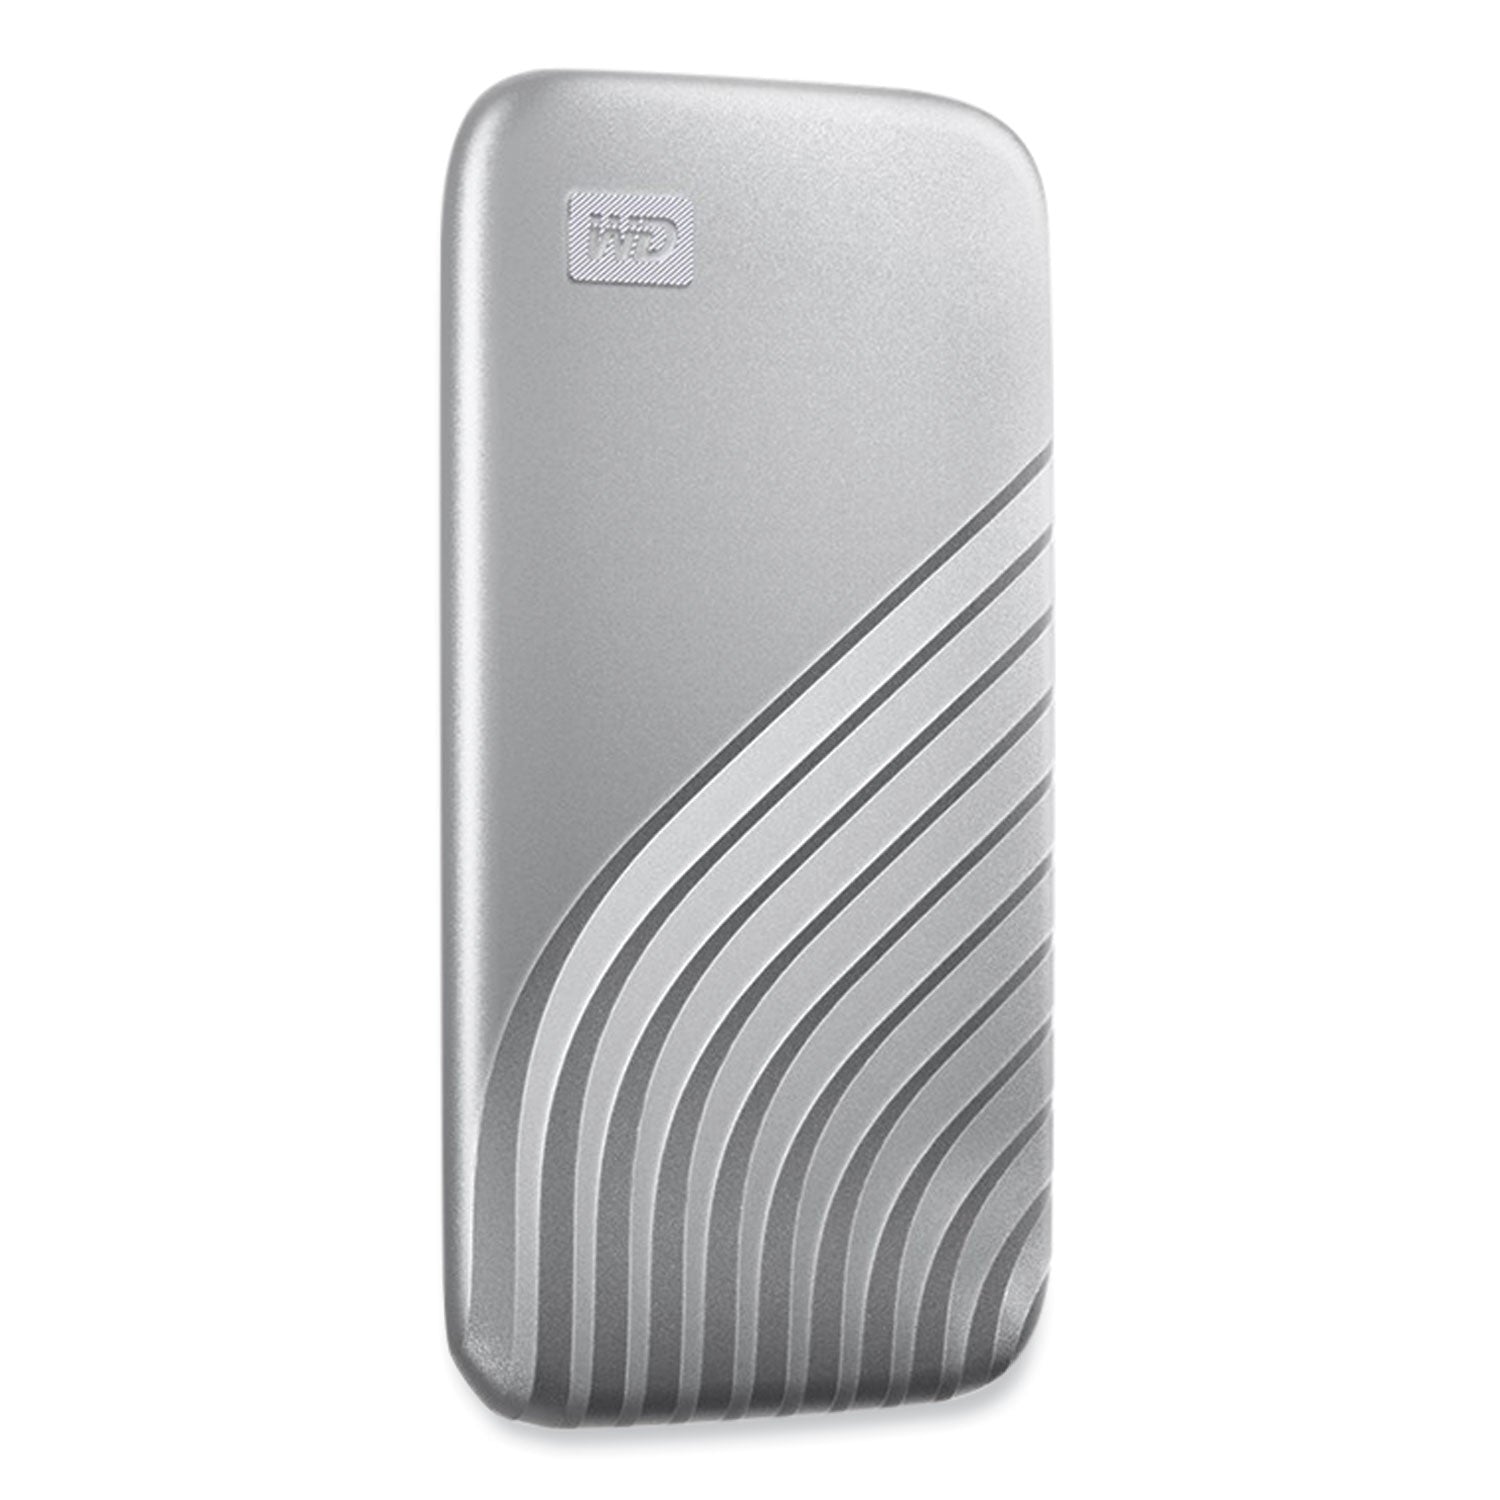 my-passport-external-solid-state-drive-1-tb-usb-32-silver_wdcagf0010bsl - 2